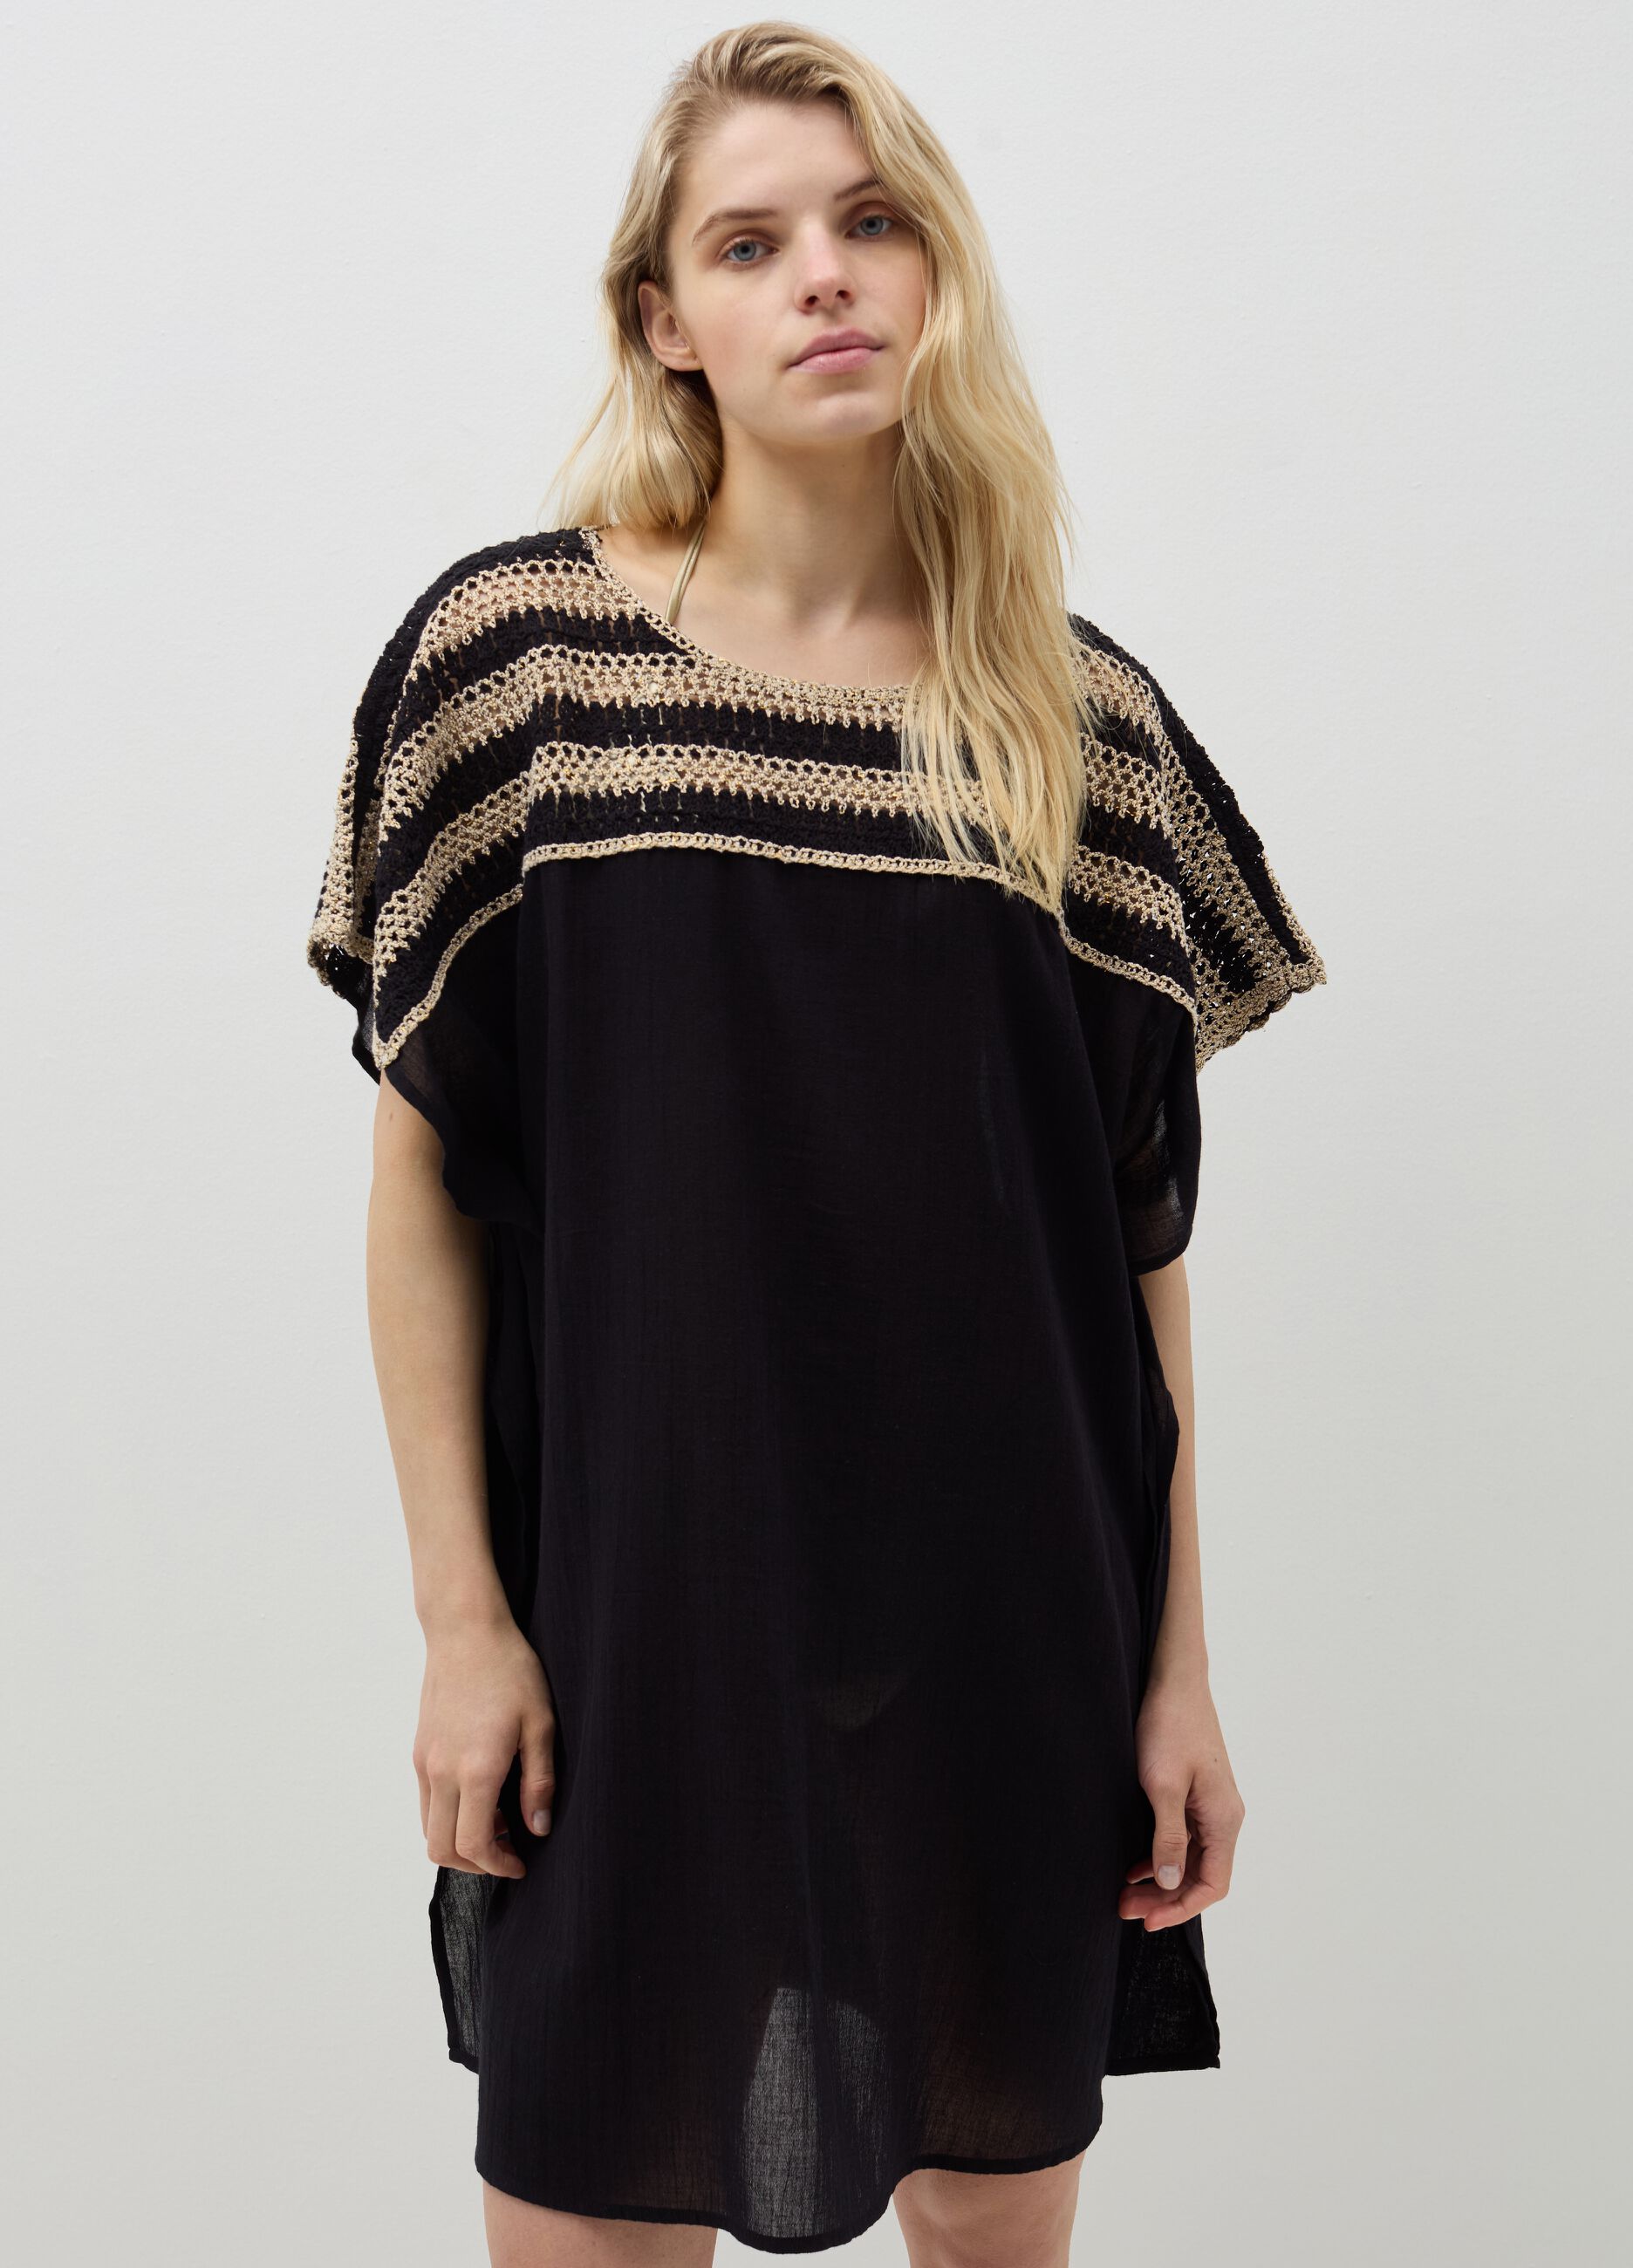 Beach cover-up poncho with crochet insert